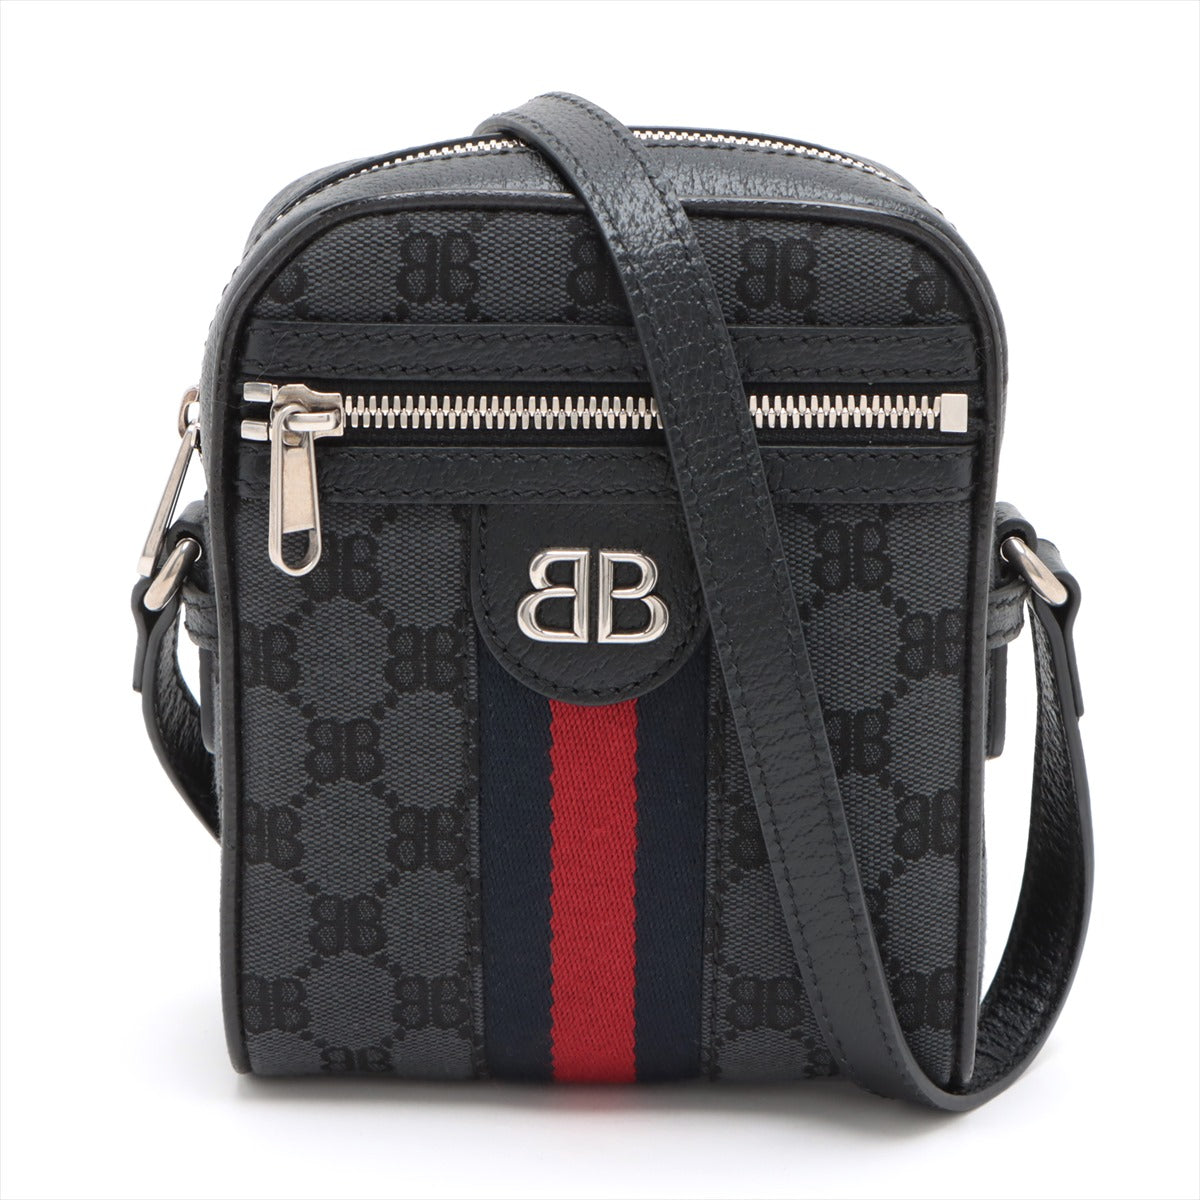 Gucci x Balenciaga The hackers projects Canvas & leather Shoulder bag Black 680129